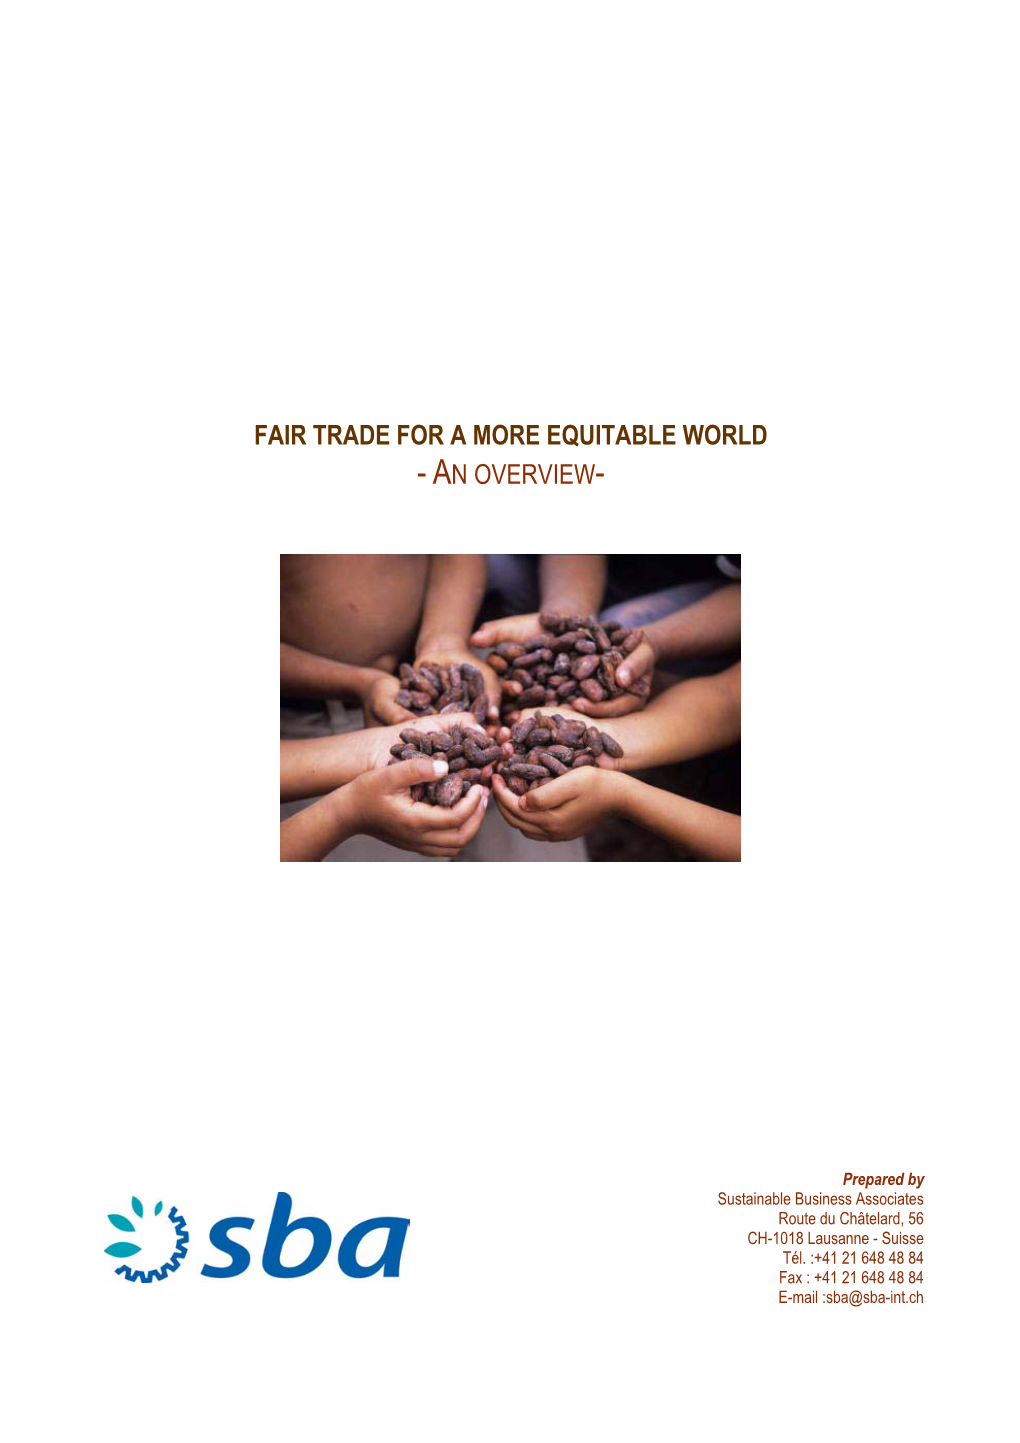 Fair Trade for a More Equitable World - an Overview